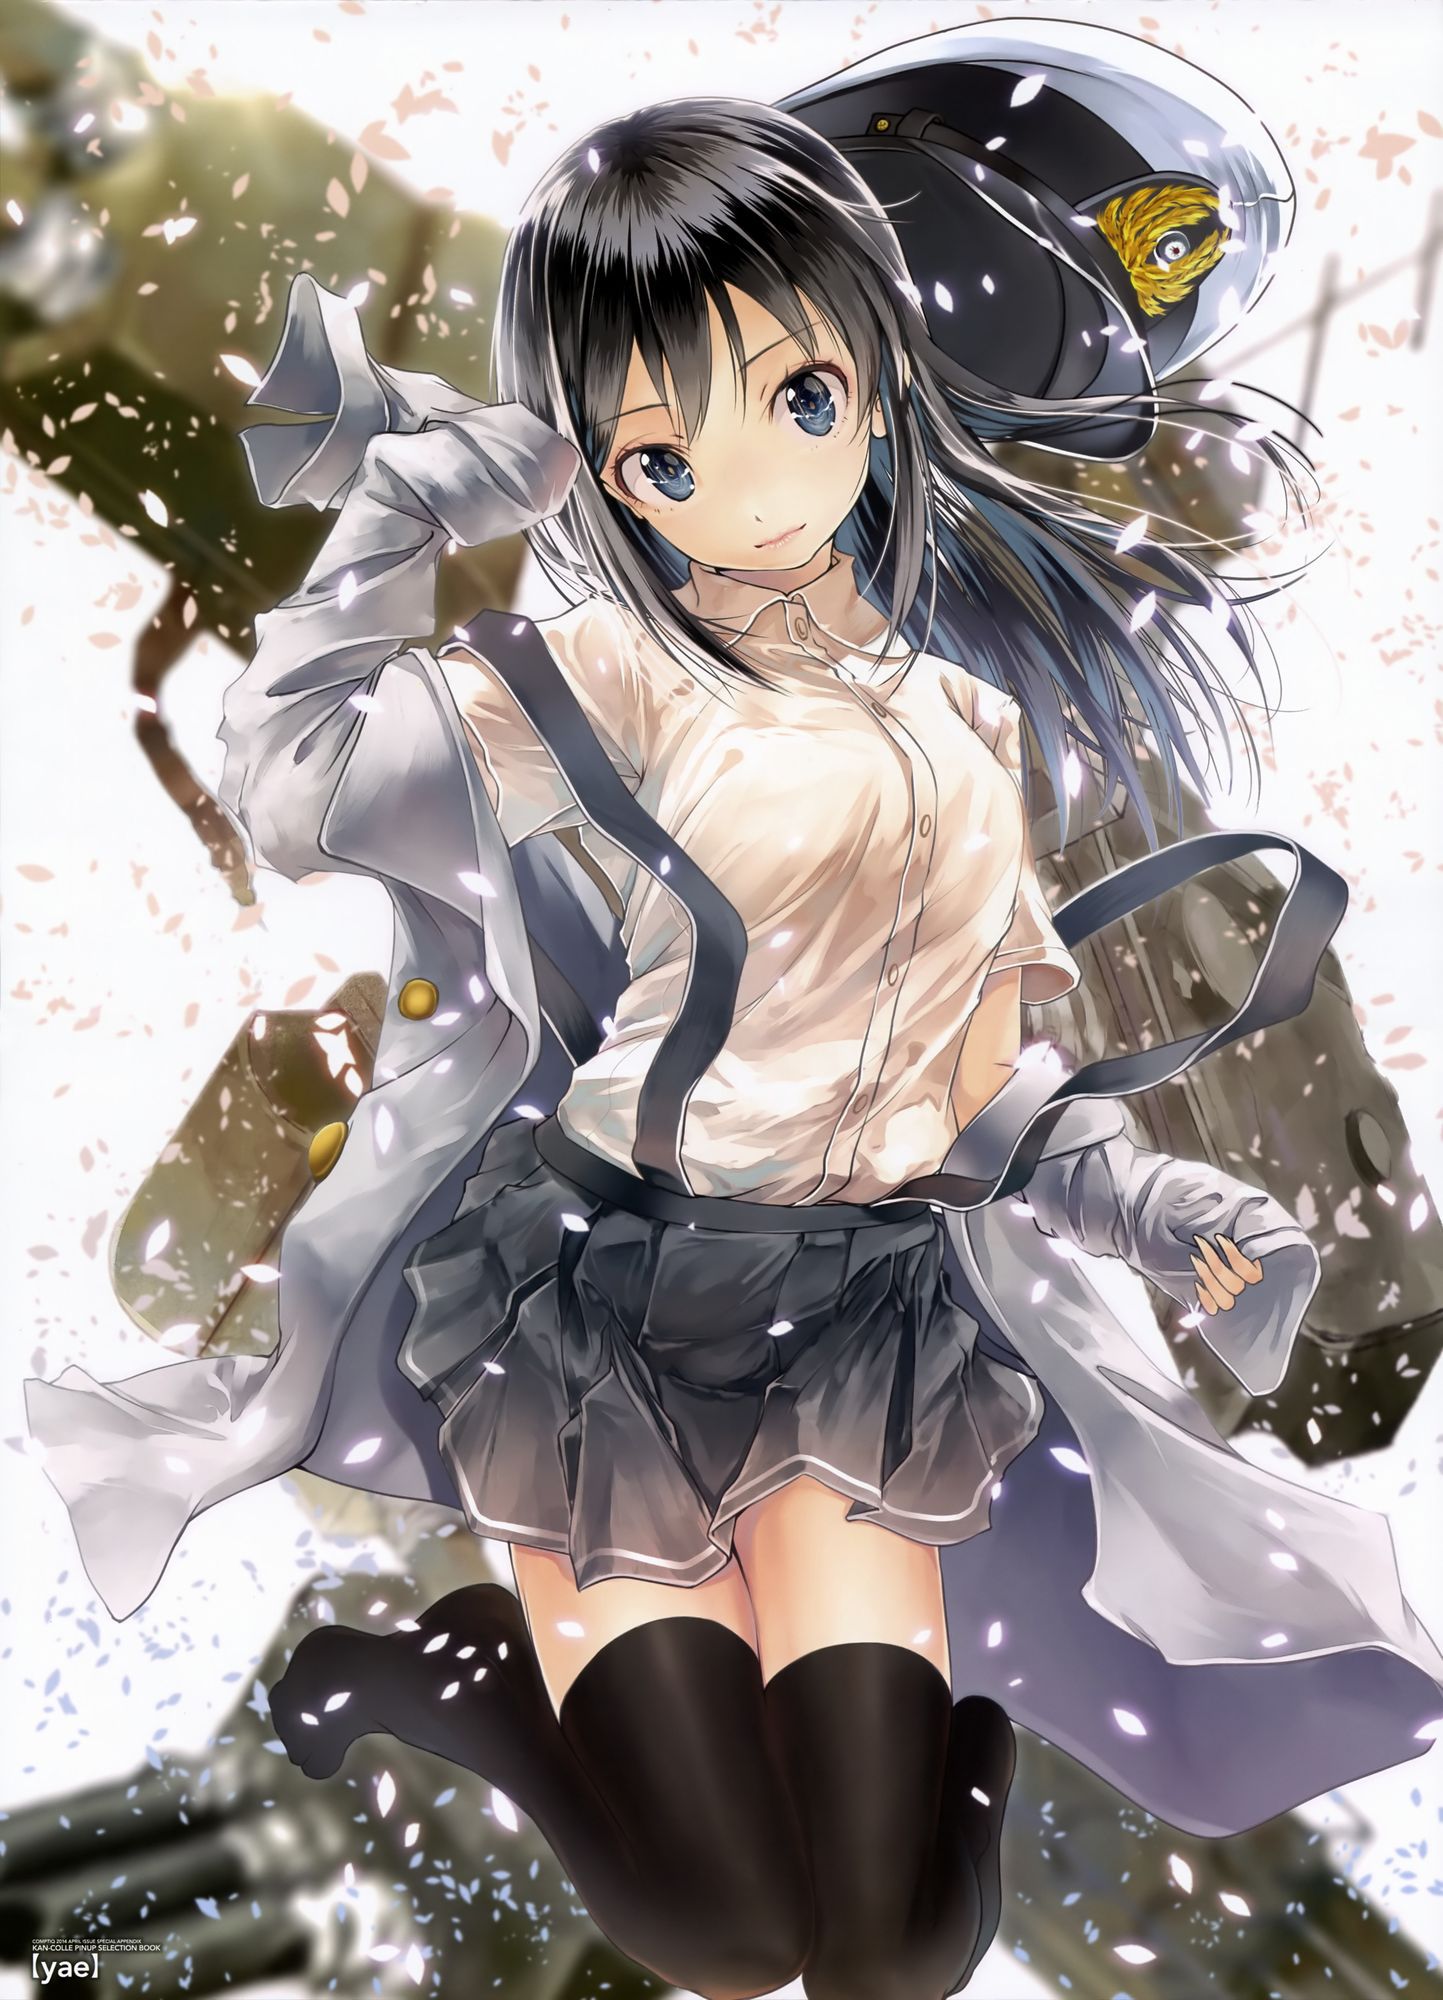 [Secondary, ZIP] pretty serious ship it together images of asashio 100 58